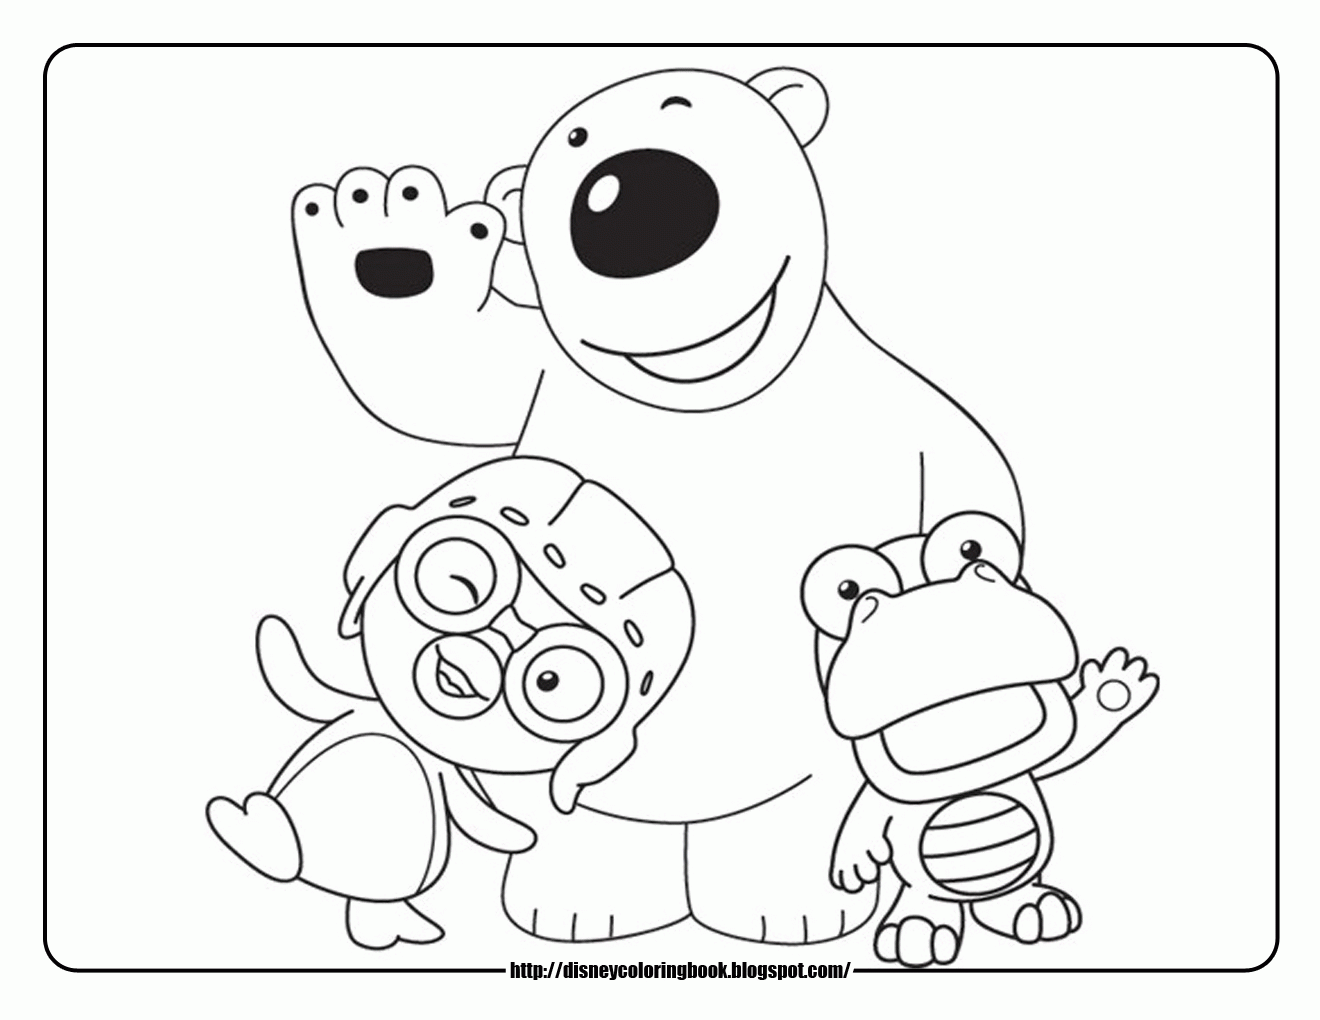 Printable Special Agent Oso Coloring Page online